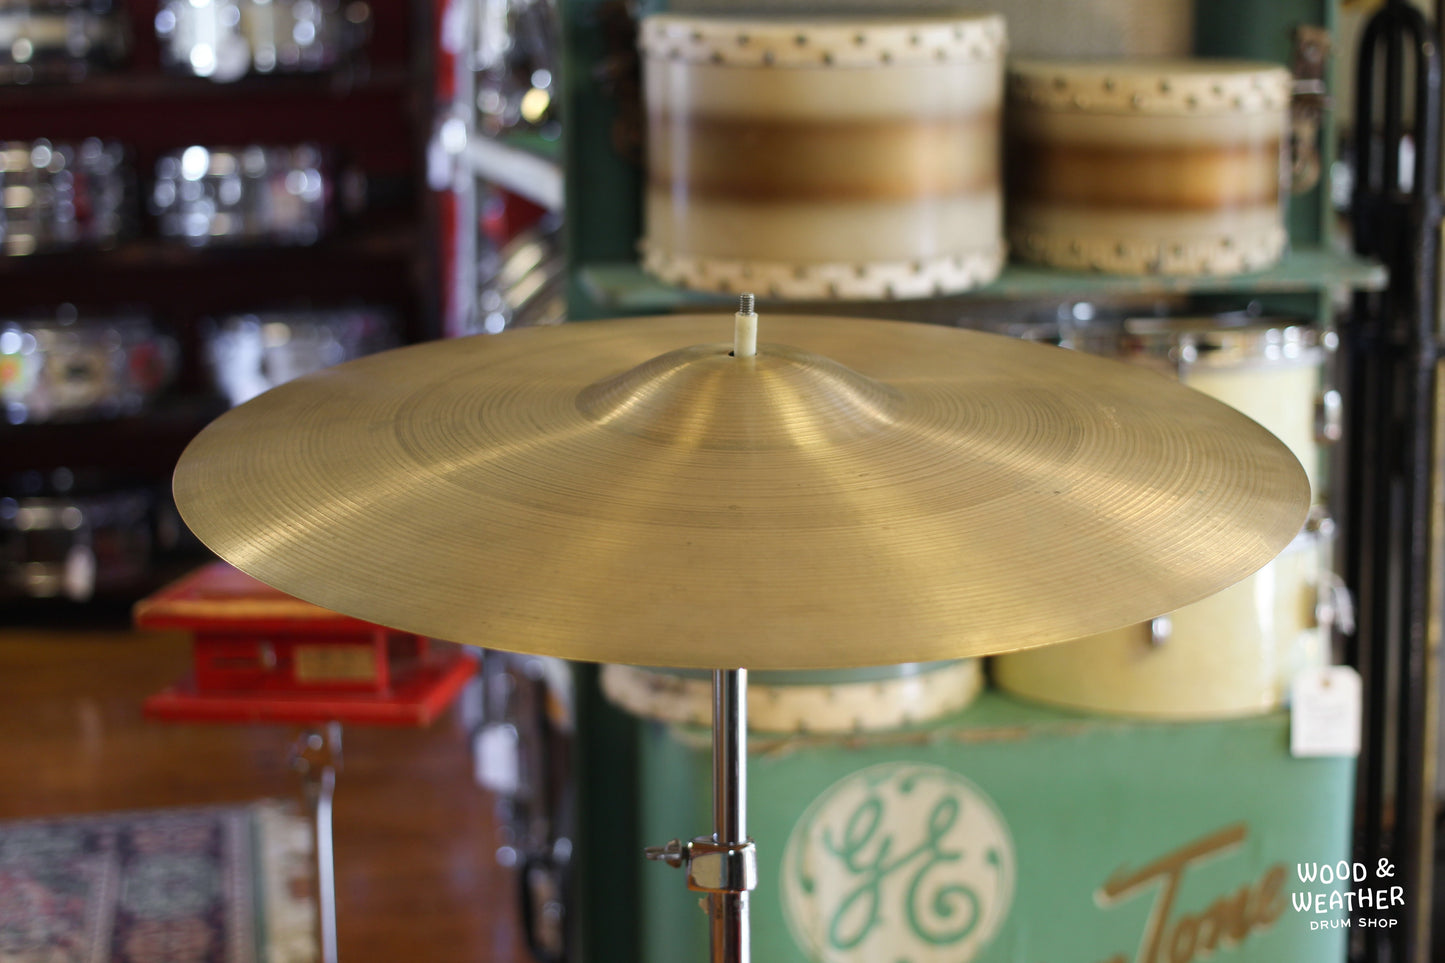 1960s Rogers SS By Azco 20" Ride Cymbal 1840g